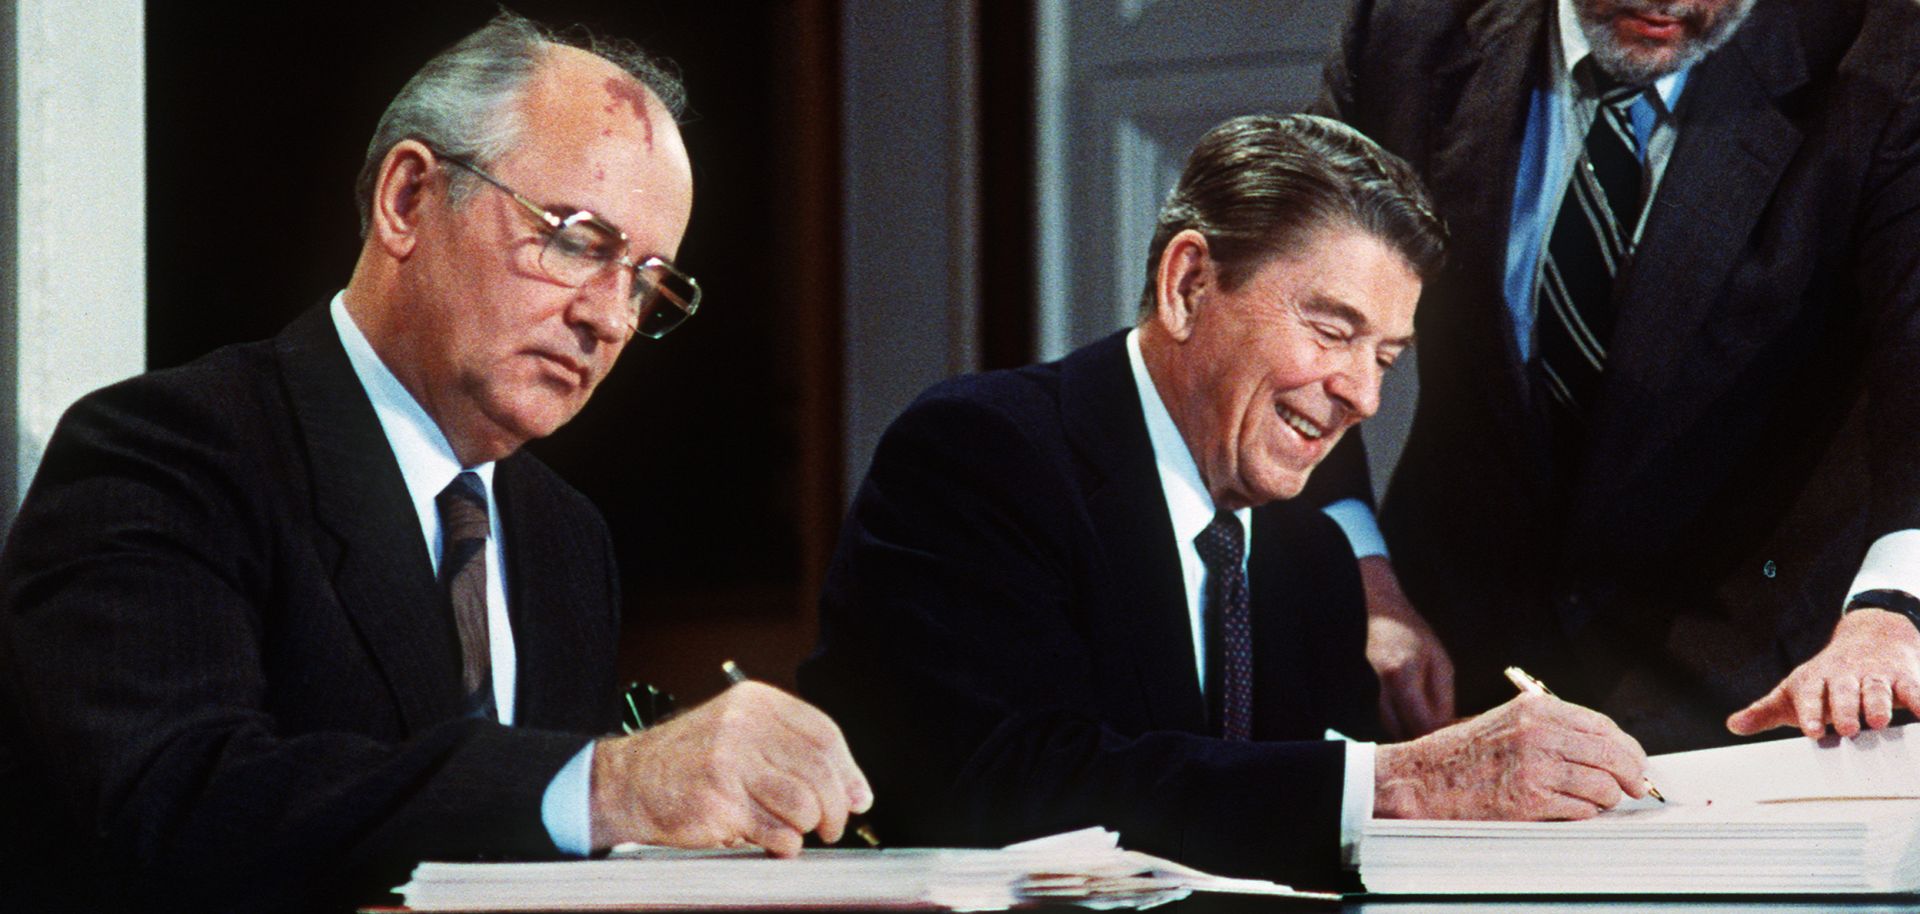 Soviet leader Mikhail Gorbachev (L) and U.S. President Ronald Reagan sign the Intermediate-Range Nuclear Forces Treaty in December 1987.